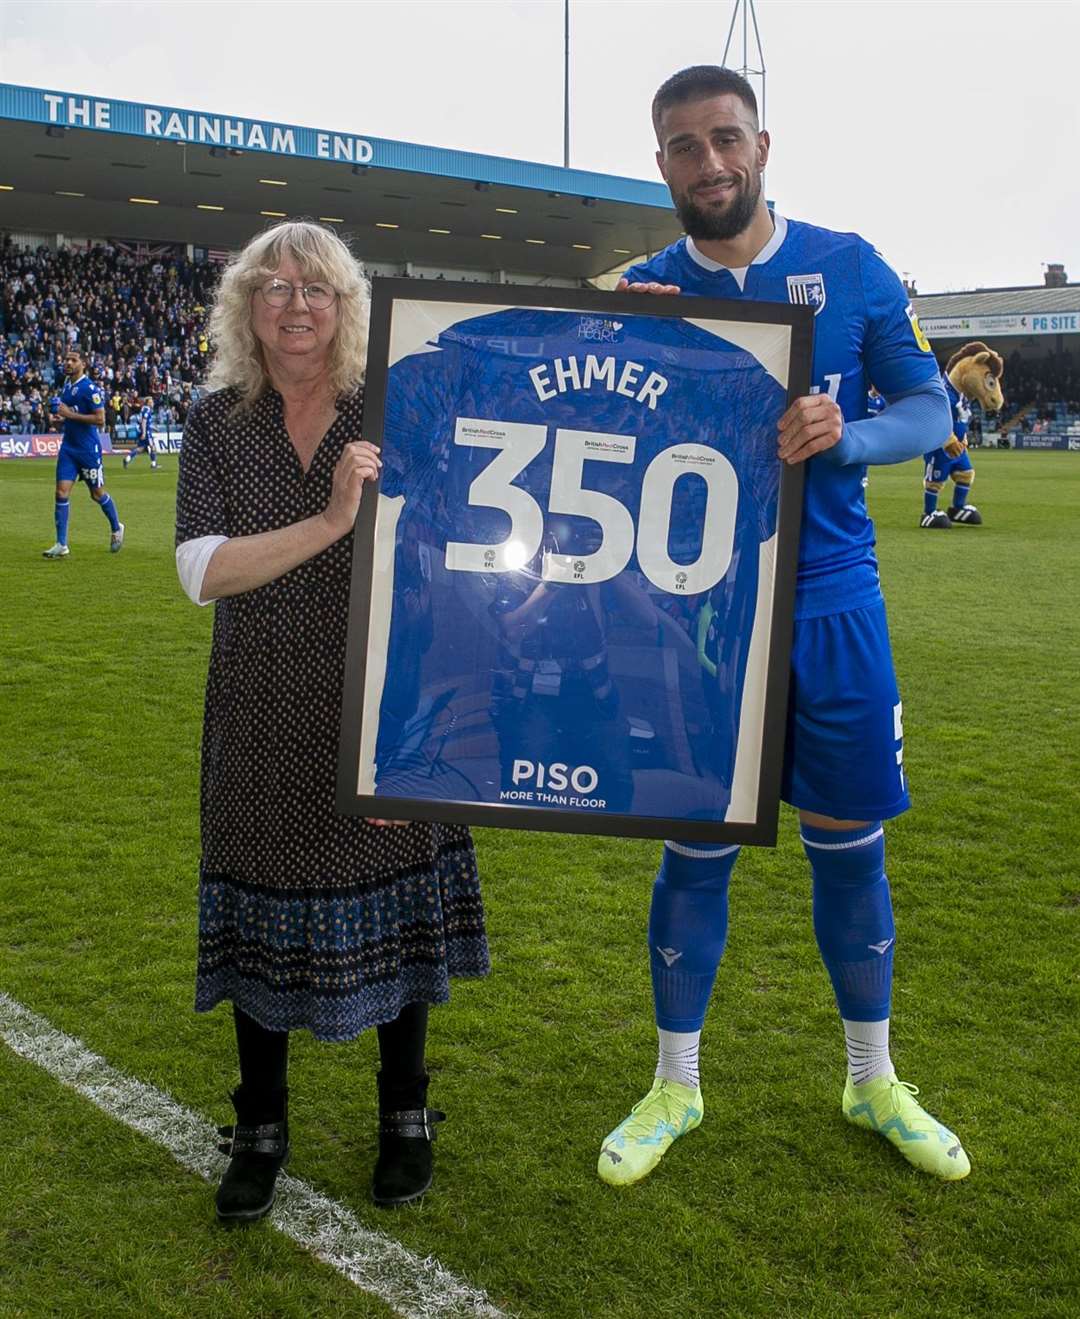 Max Ehmer, who signed a new deal at the end of last week, receives a commemorative shirt marking 350 appearances for Gillingham.